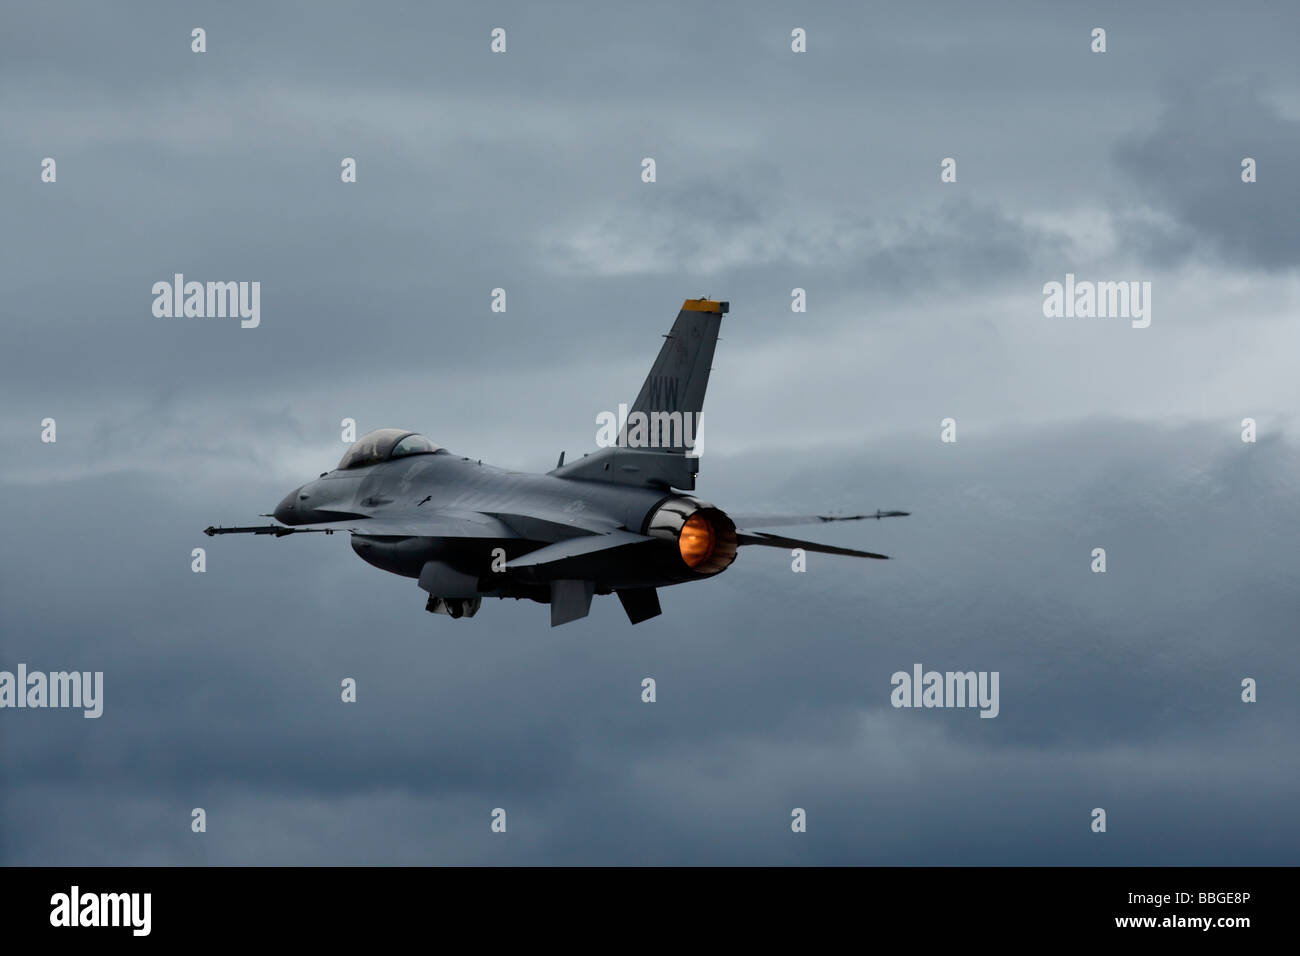 F 16 Fighting Falcon under Full Thrust on Take off Stock Photo